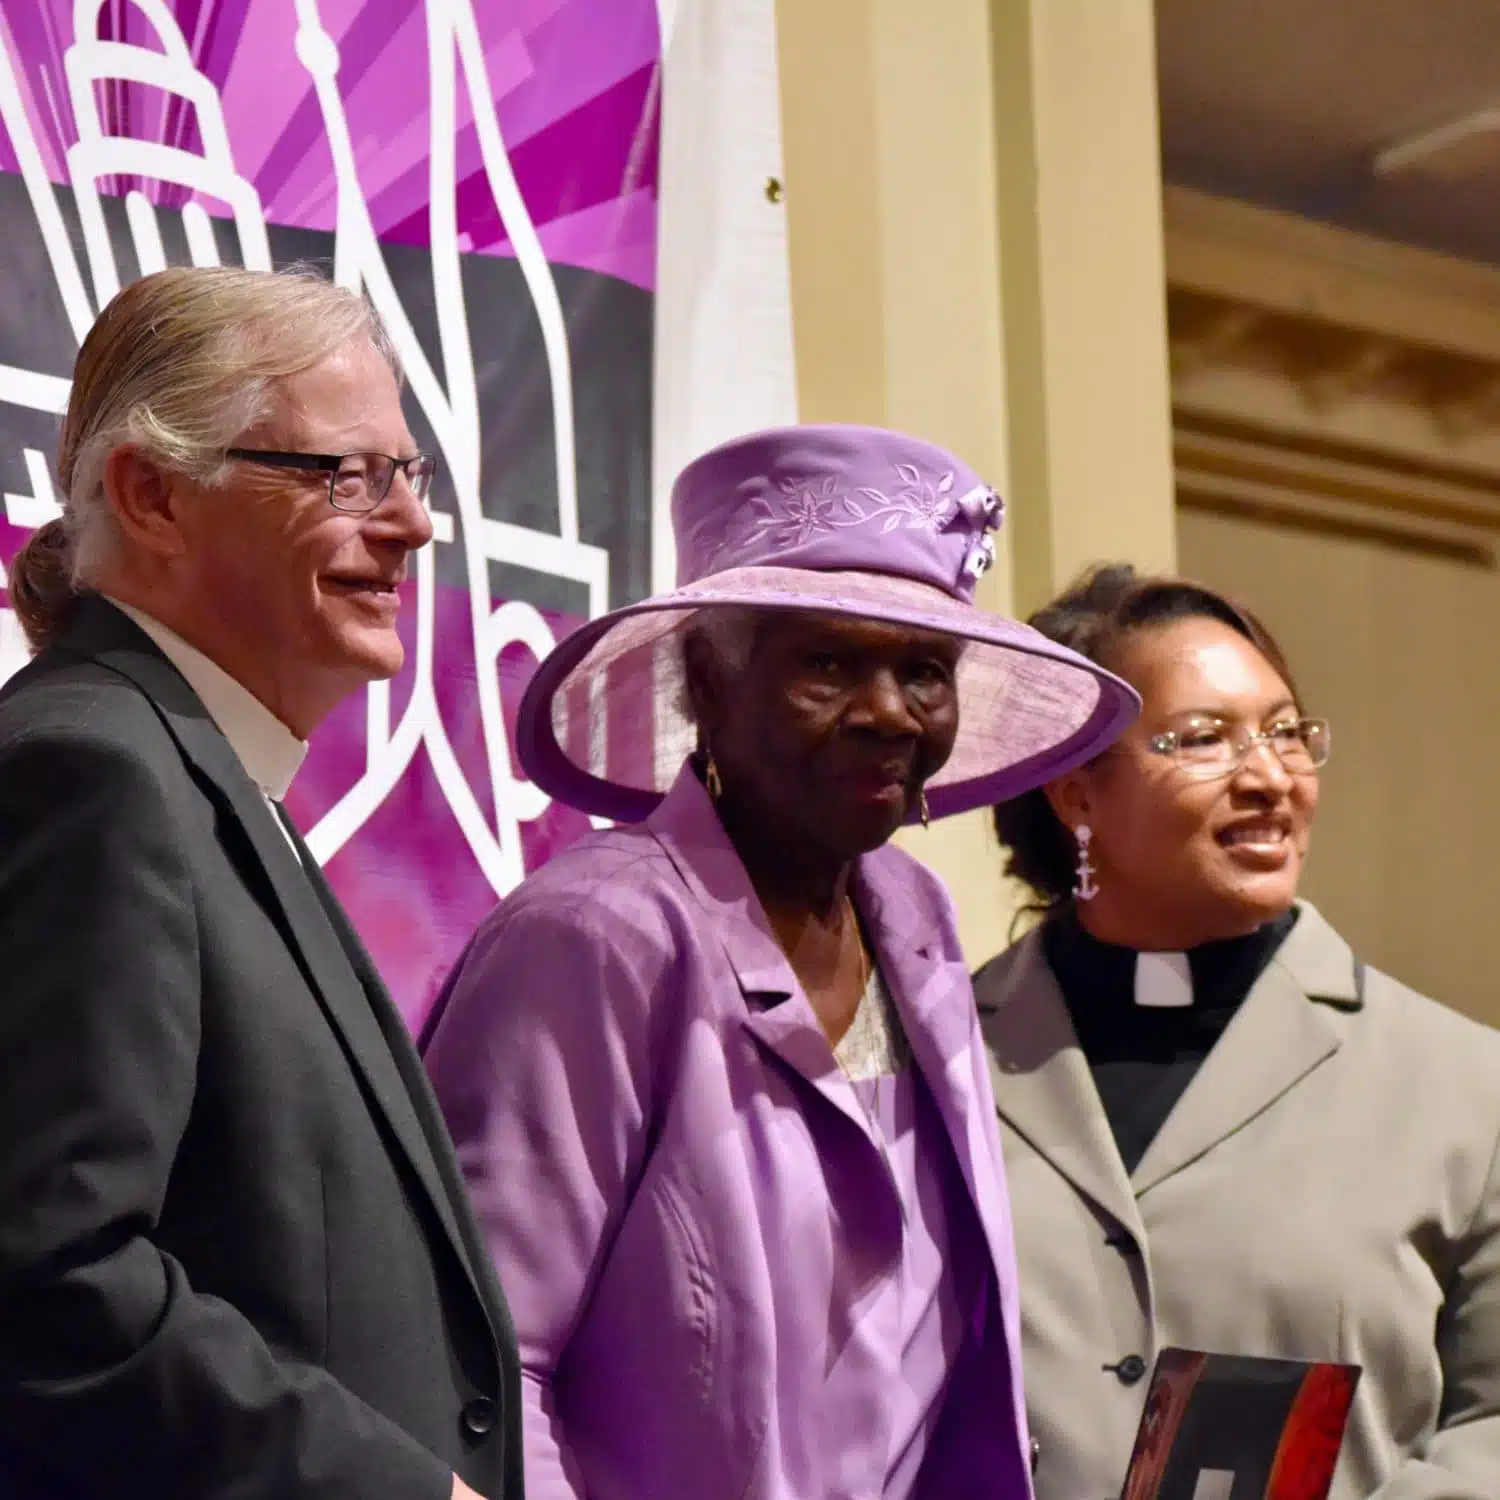 Eighth Annual Heroes of Faith Awards a snapshot of religious advocacy in Rhode Island